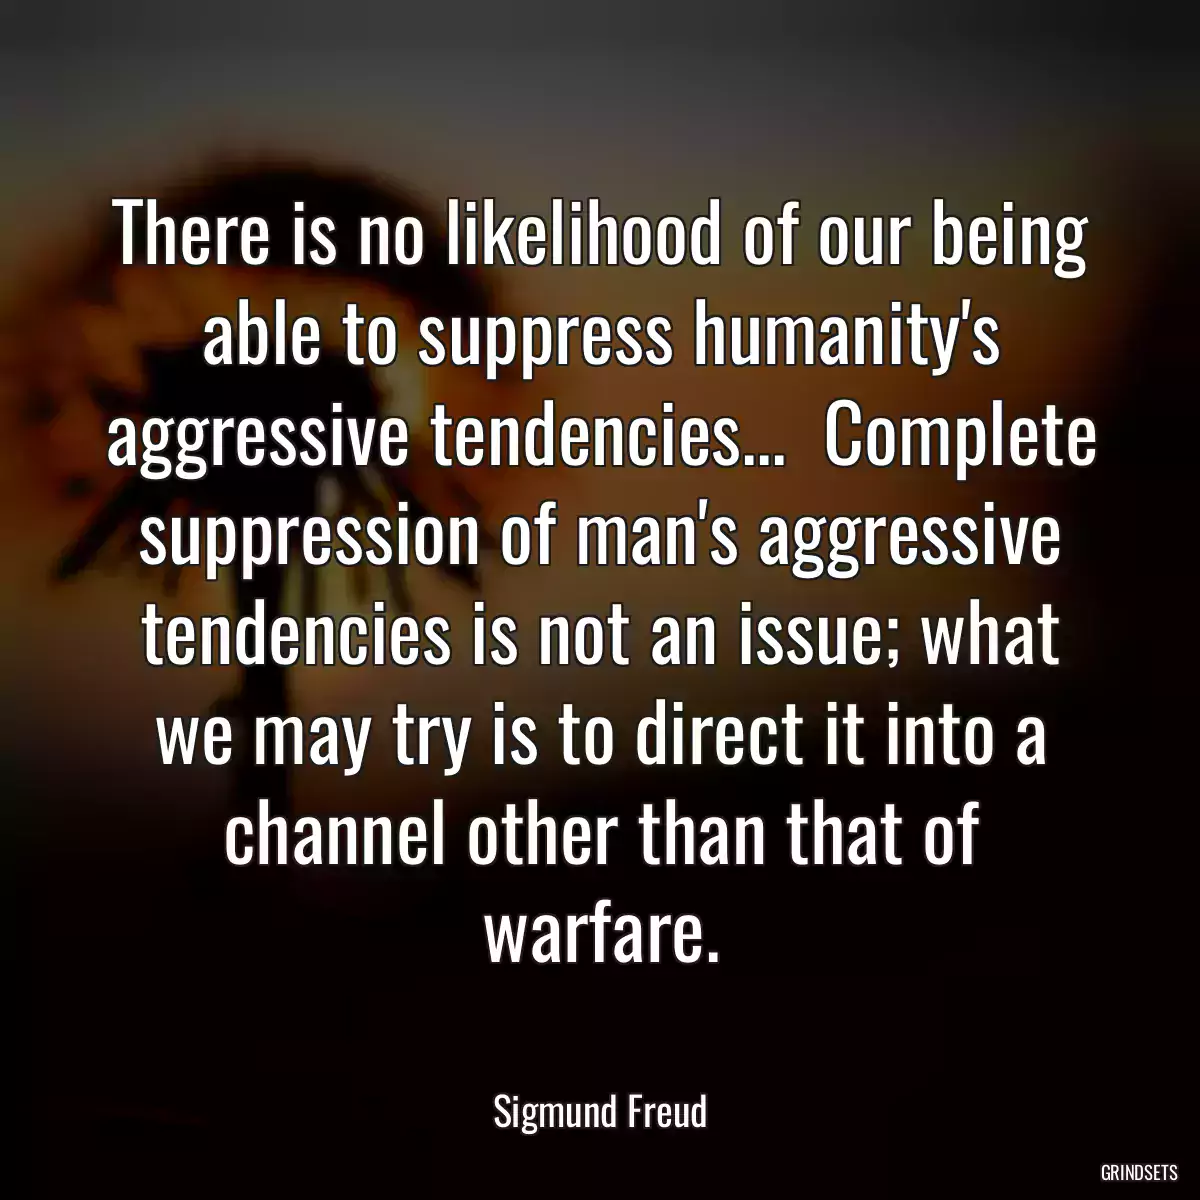 There is no likelihood of our being able to suppress humanity\'s aggressive tendencies...  Complete suppression of man\'s aggressive tendencies is not an issue; what we may try is to direct it into a channel other than that of warfare.